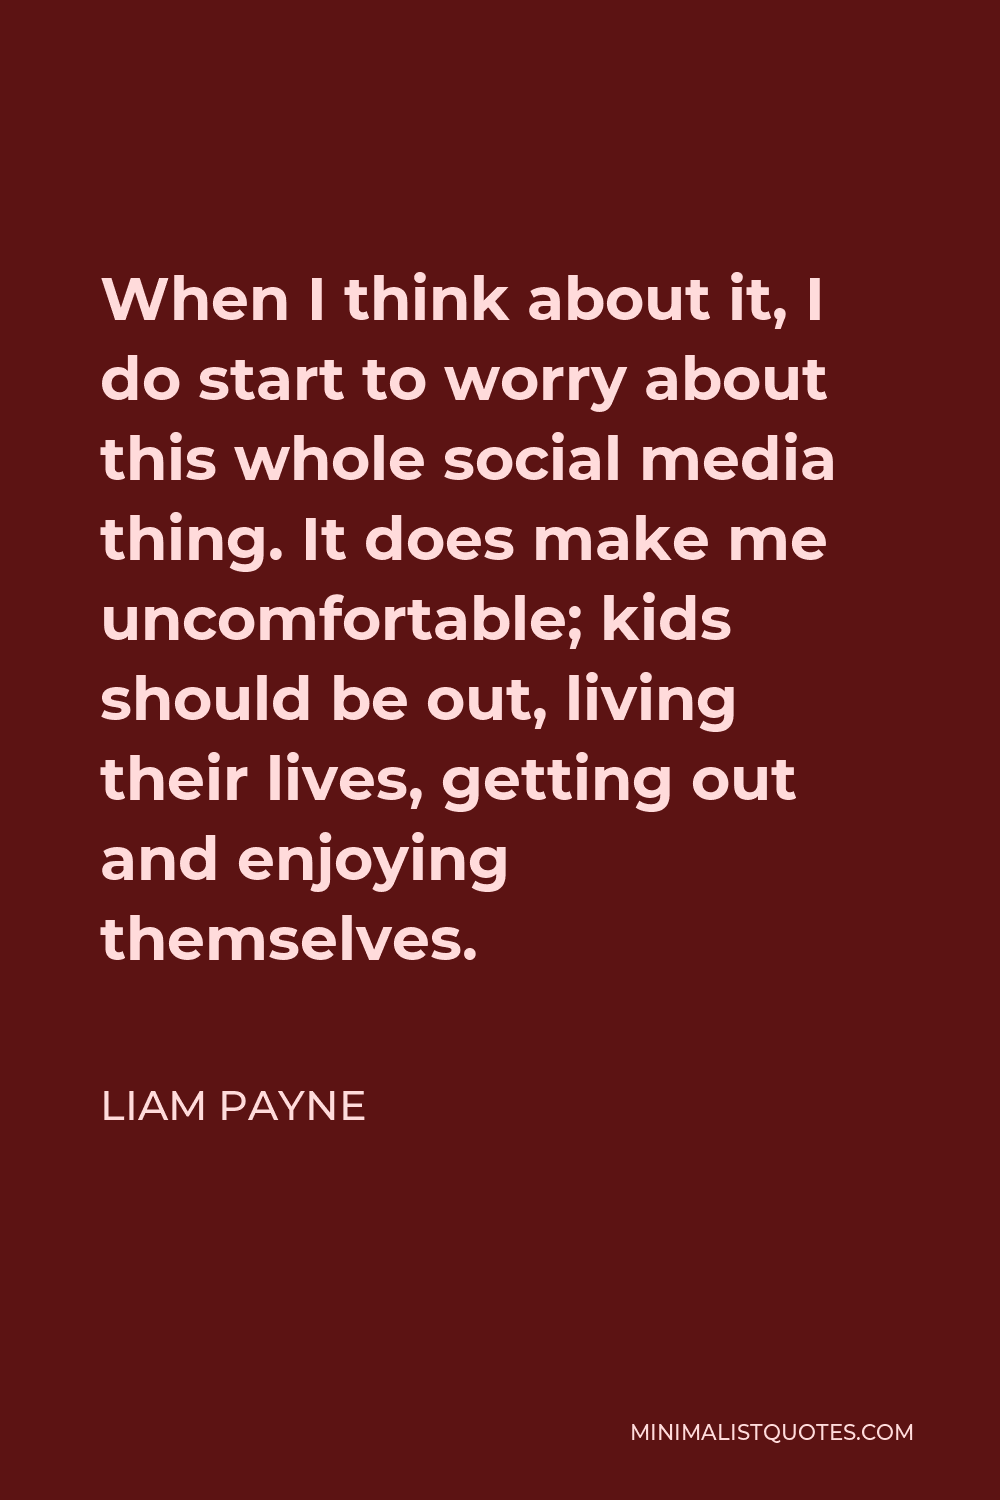 Liam Payne Quote - When I think about it, I do start to worry about this whole social media thing. It does make me uncomfortable; kids should be out, living their lives, getting out and enjoying themselves.